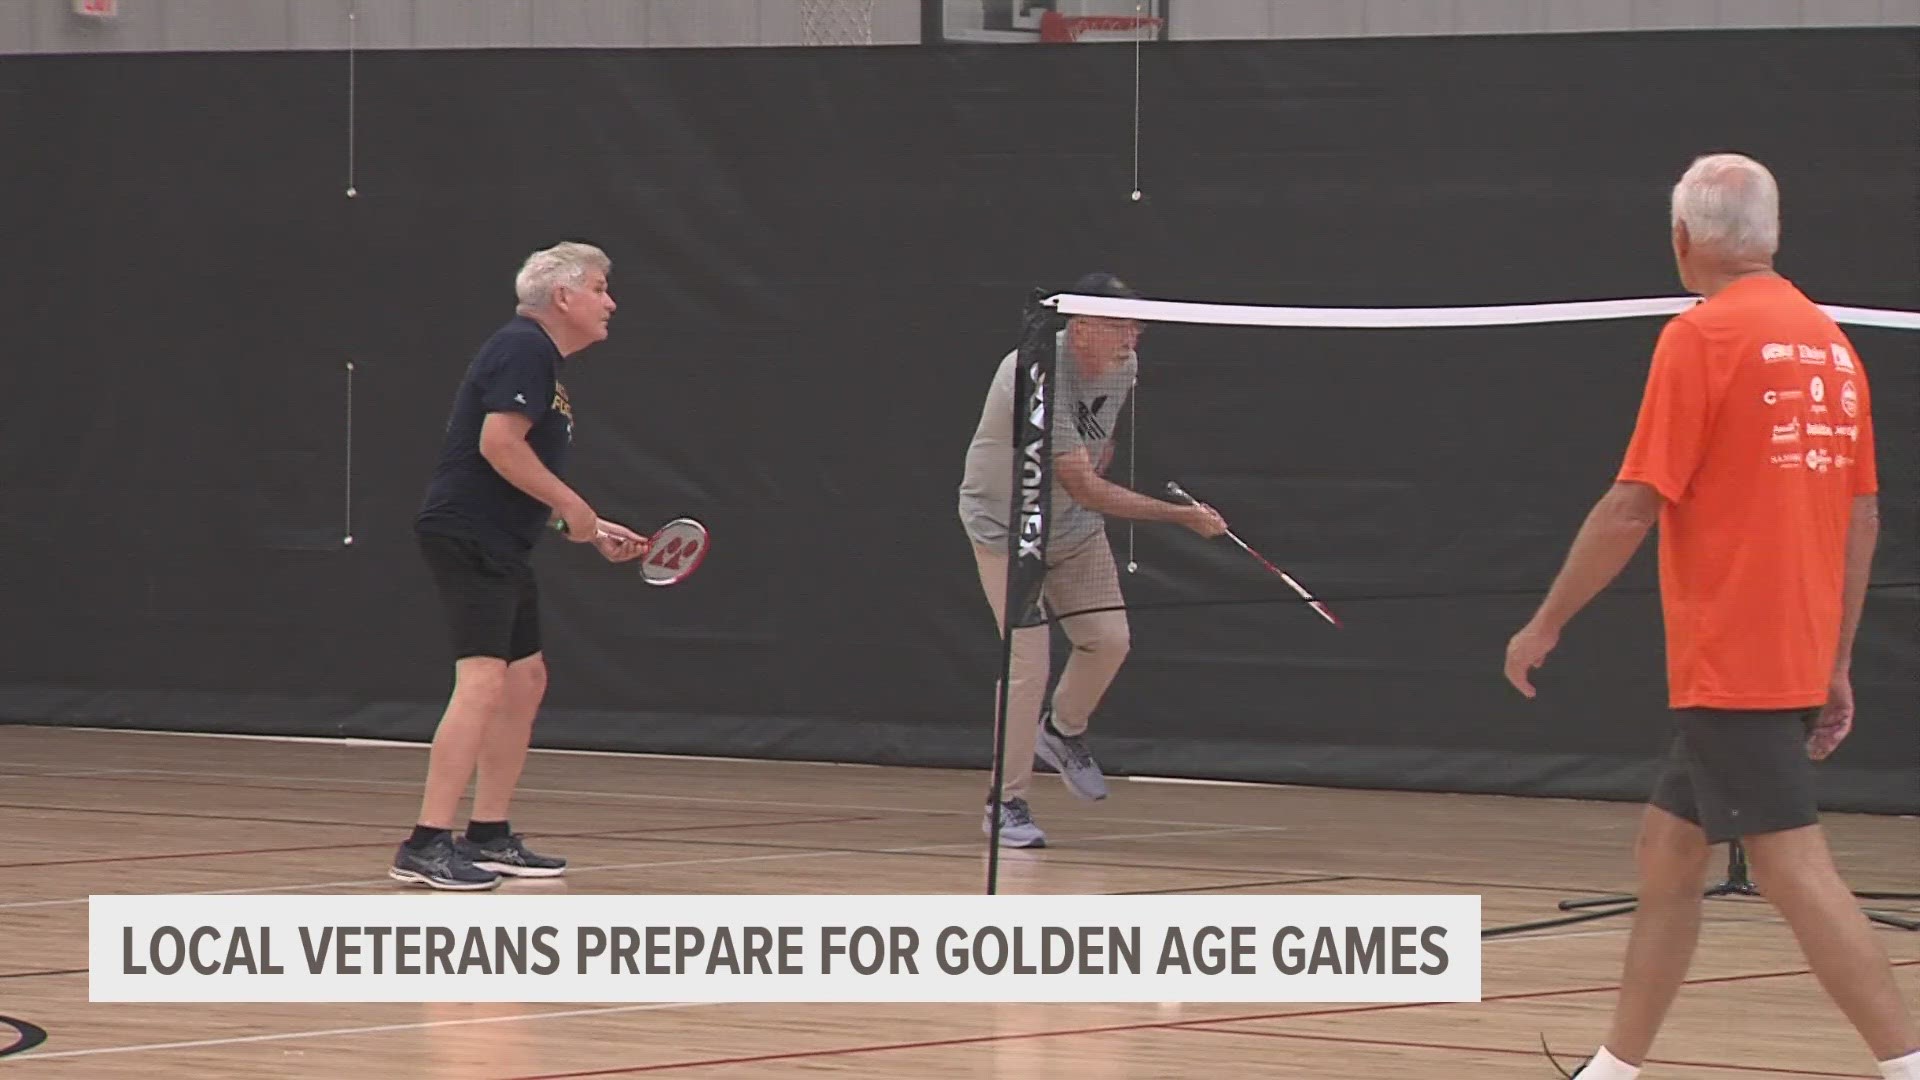 National Veterans Golden Age Games to take place in Des Moines